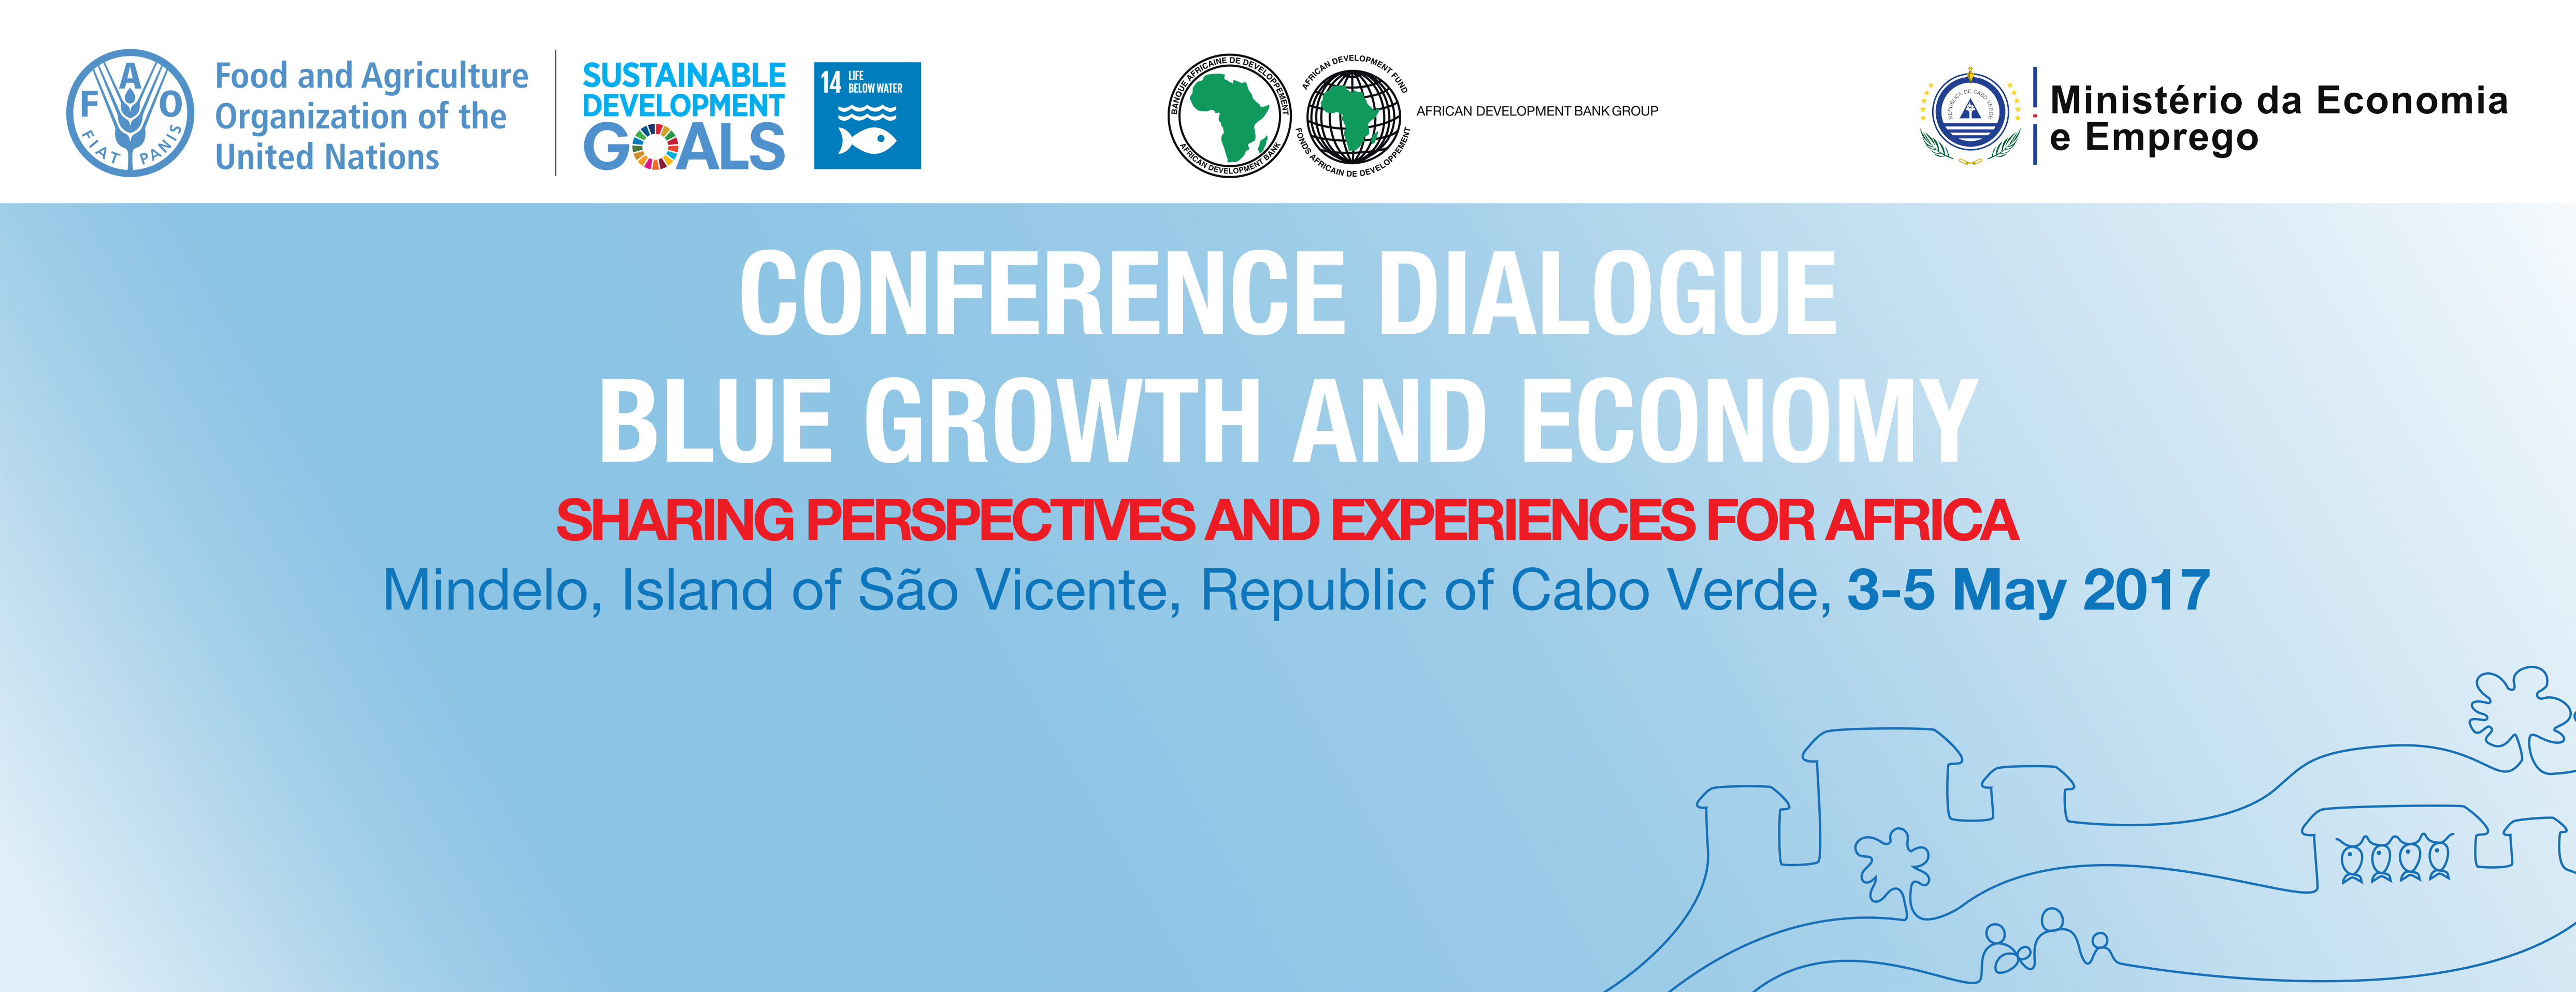 Conference Dialogue on Blue Growth and Economy – Sharing Perspectives and Experiences for Africa | Regional Office for Africa | Food and Agriculture Organization of the United Nations